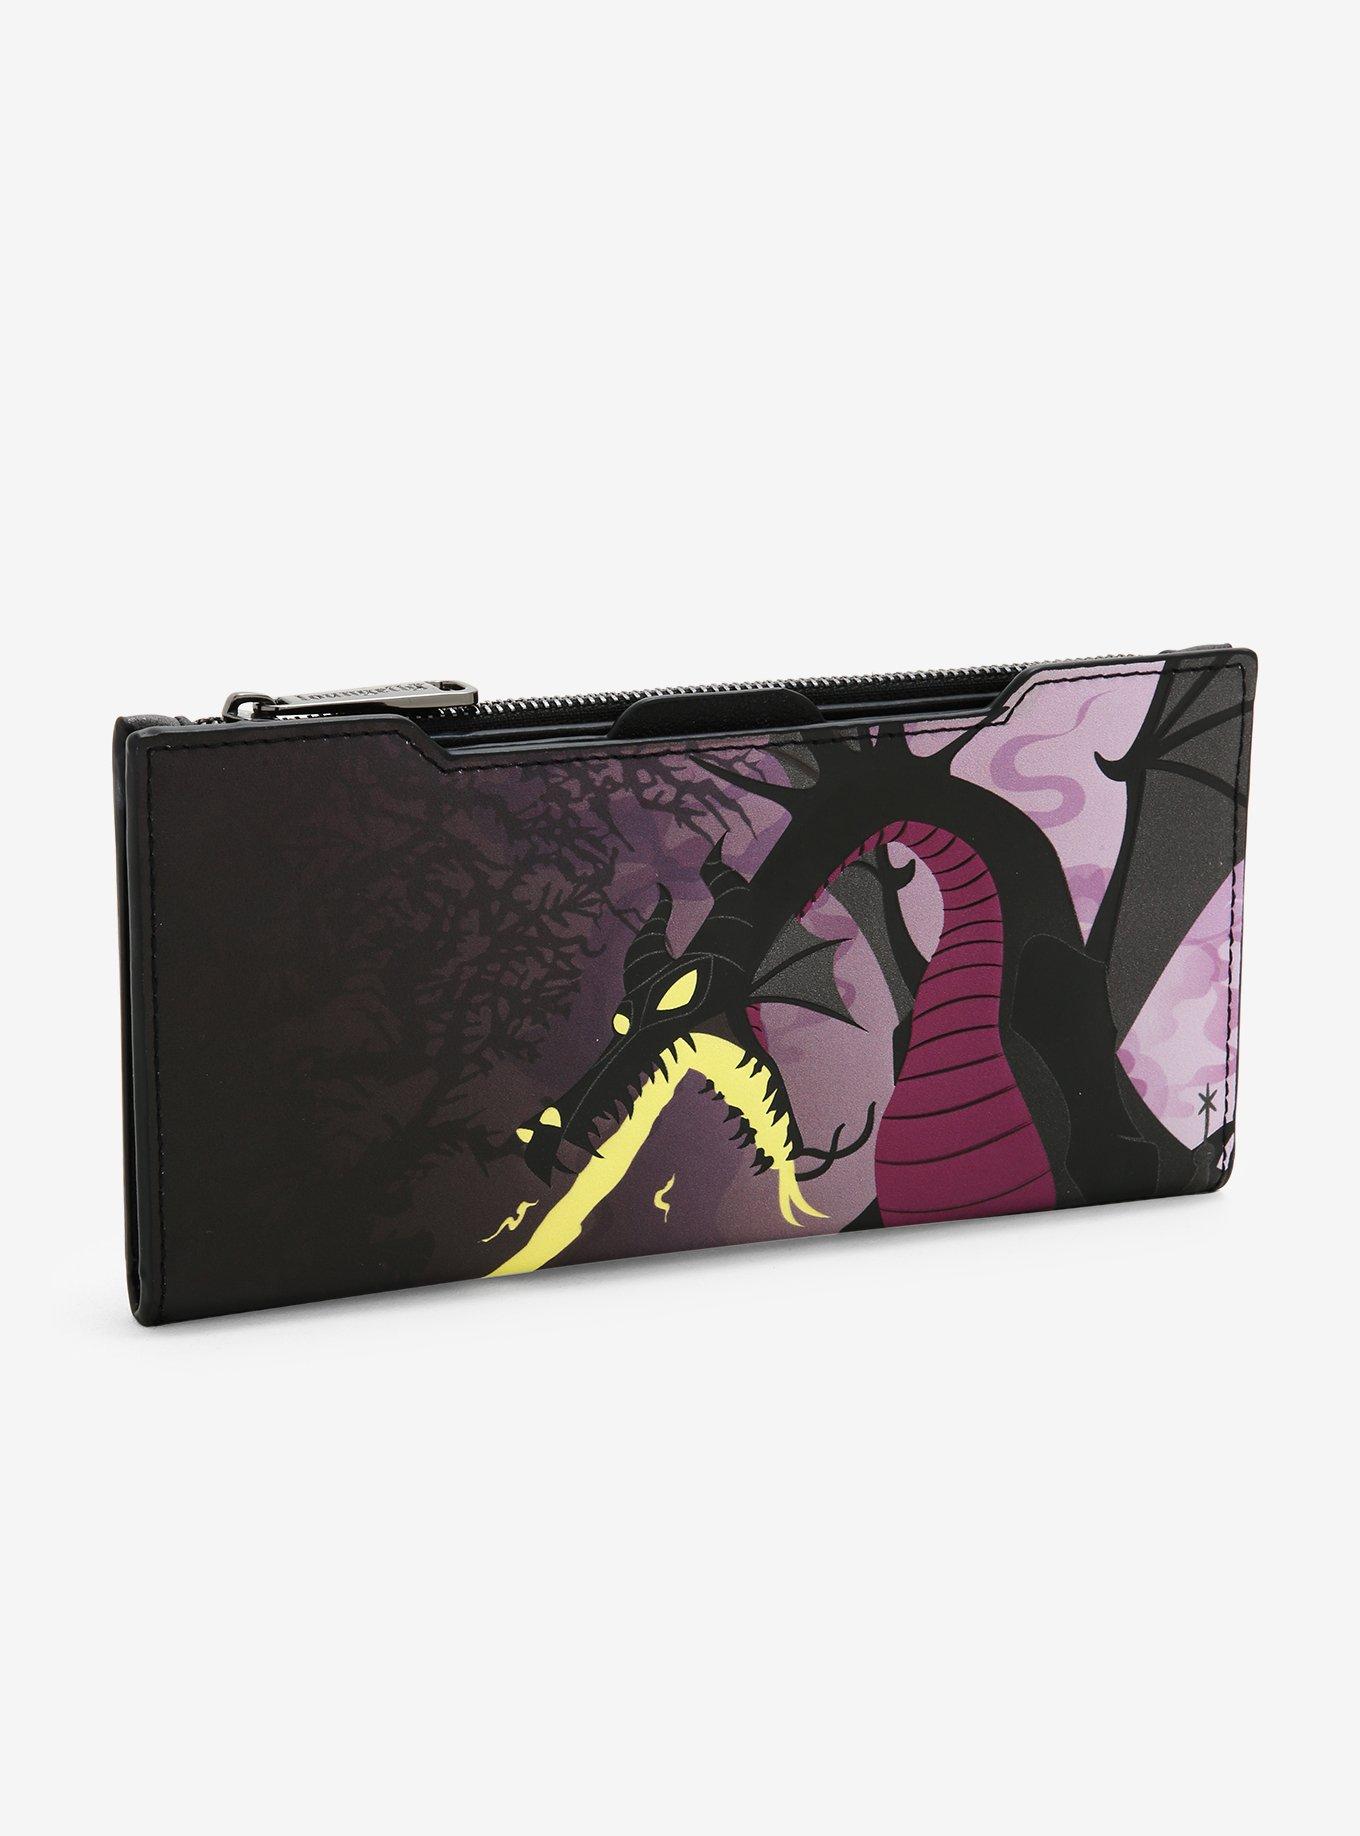 Disney Bag and Wallet Combo, Sleeping Beauty Maleficent Pose Close Up, —  Buckle-Down